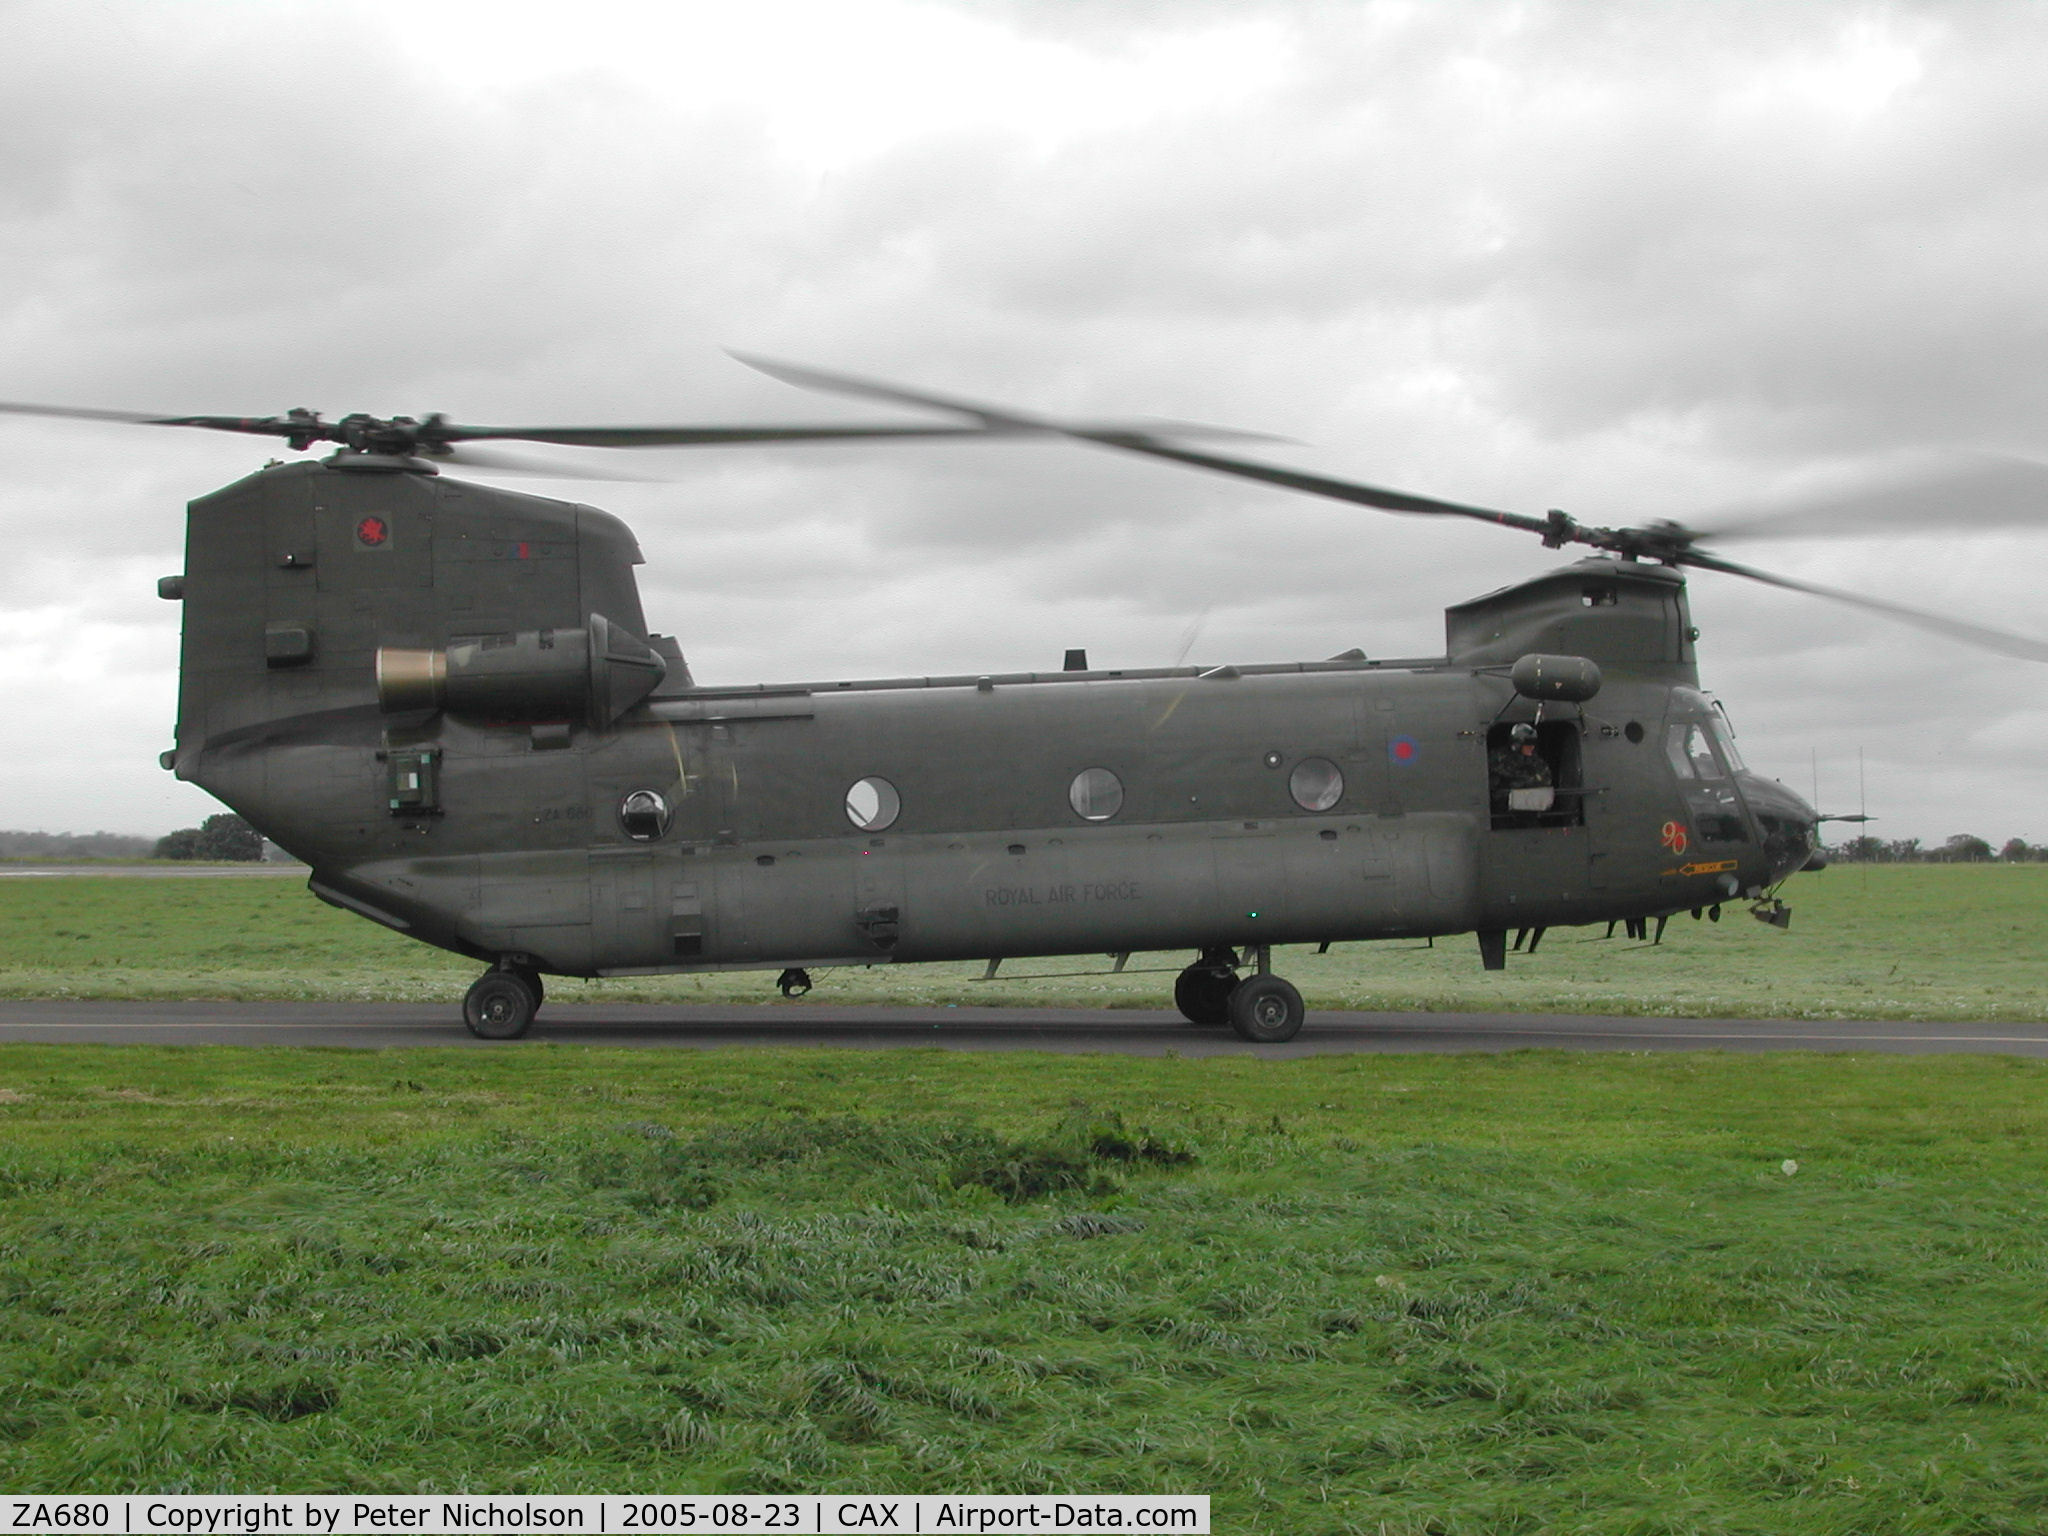 ZA680, Boeing Vertol Chinook HC.2 C/N M/A011/B-828/M7024, Chinook HC.2, callsign Twister 2, of 18 Squadron on a Qualified Helicopter Tactics Instructor course seen at Carlisle in August 2005.